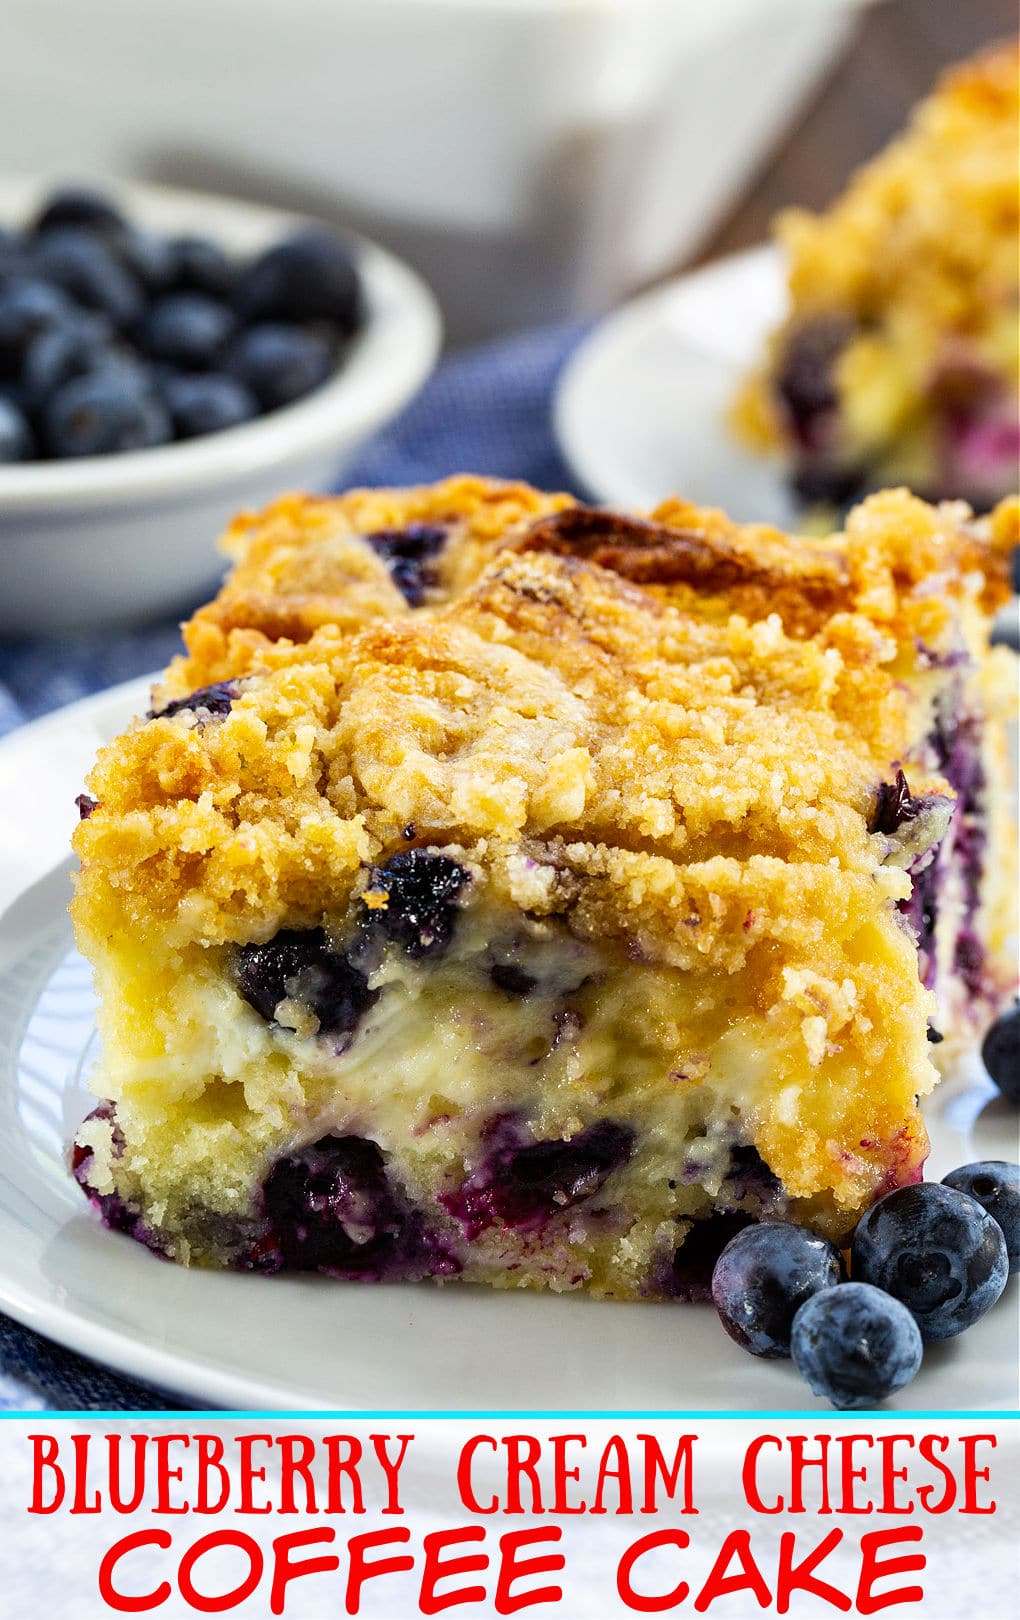 Slice of Blueberry Cream Cheese Coffee Cake on a small plate.